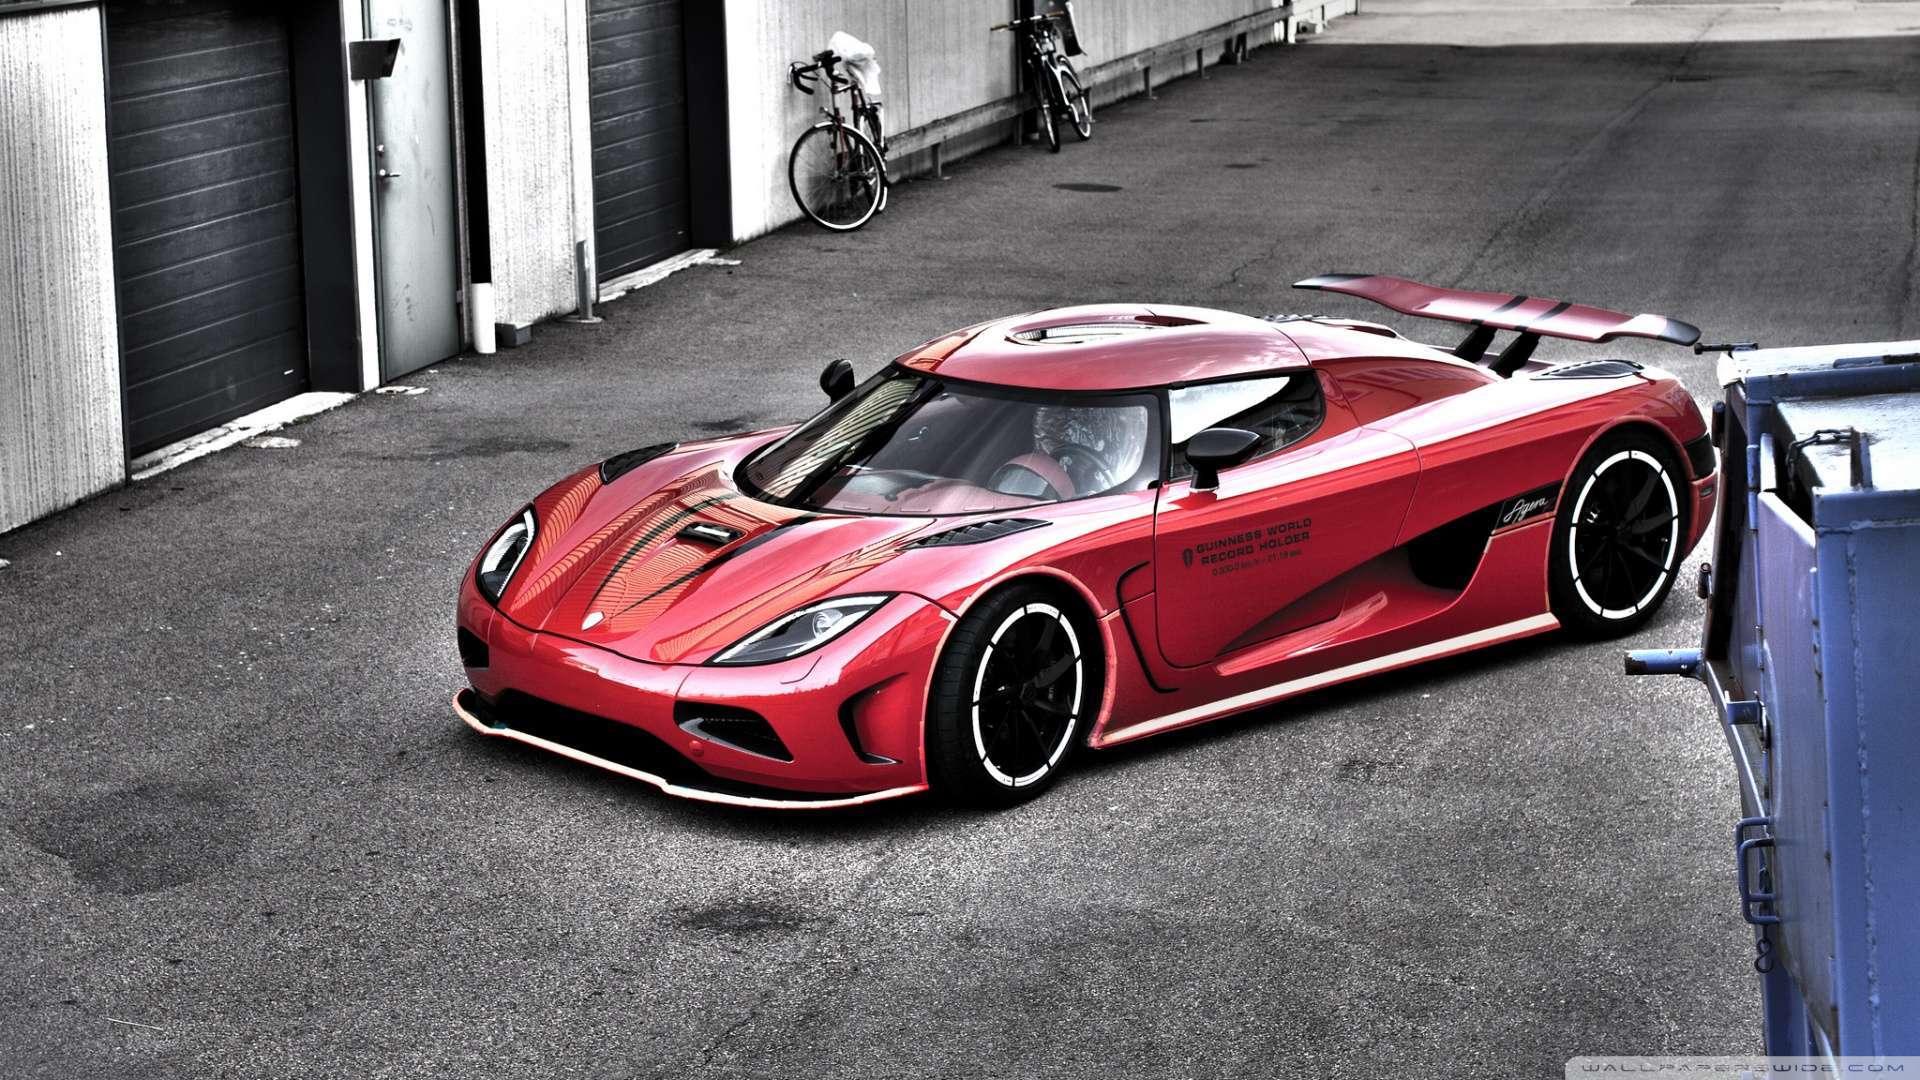 Red Koenigsegg HDr Wallpaper 1080p HD Car Pictures